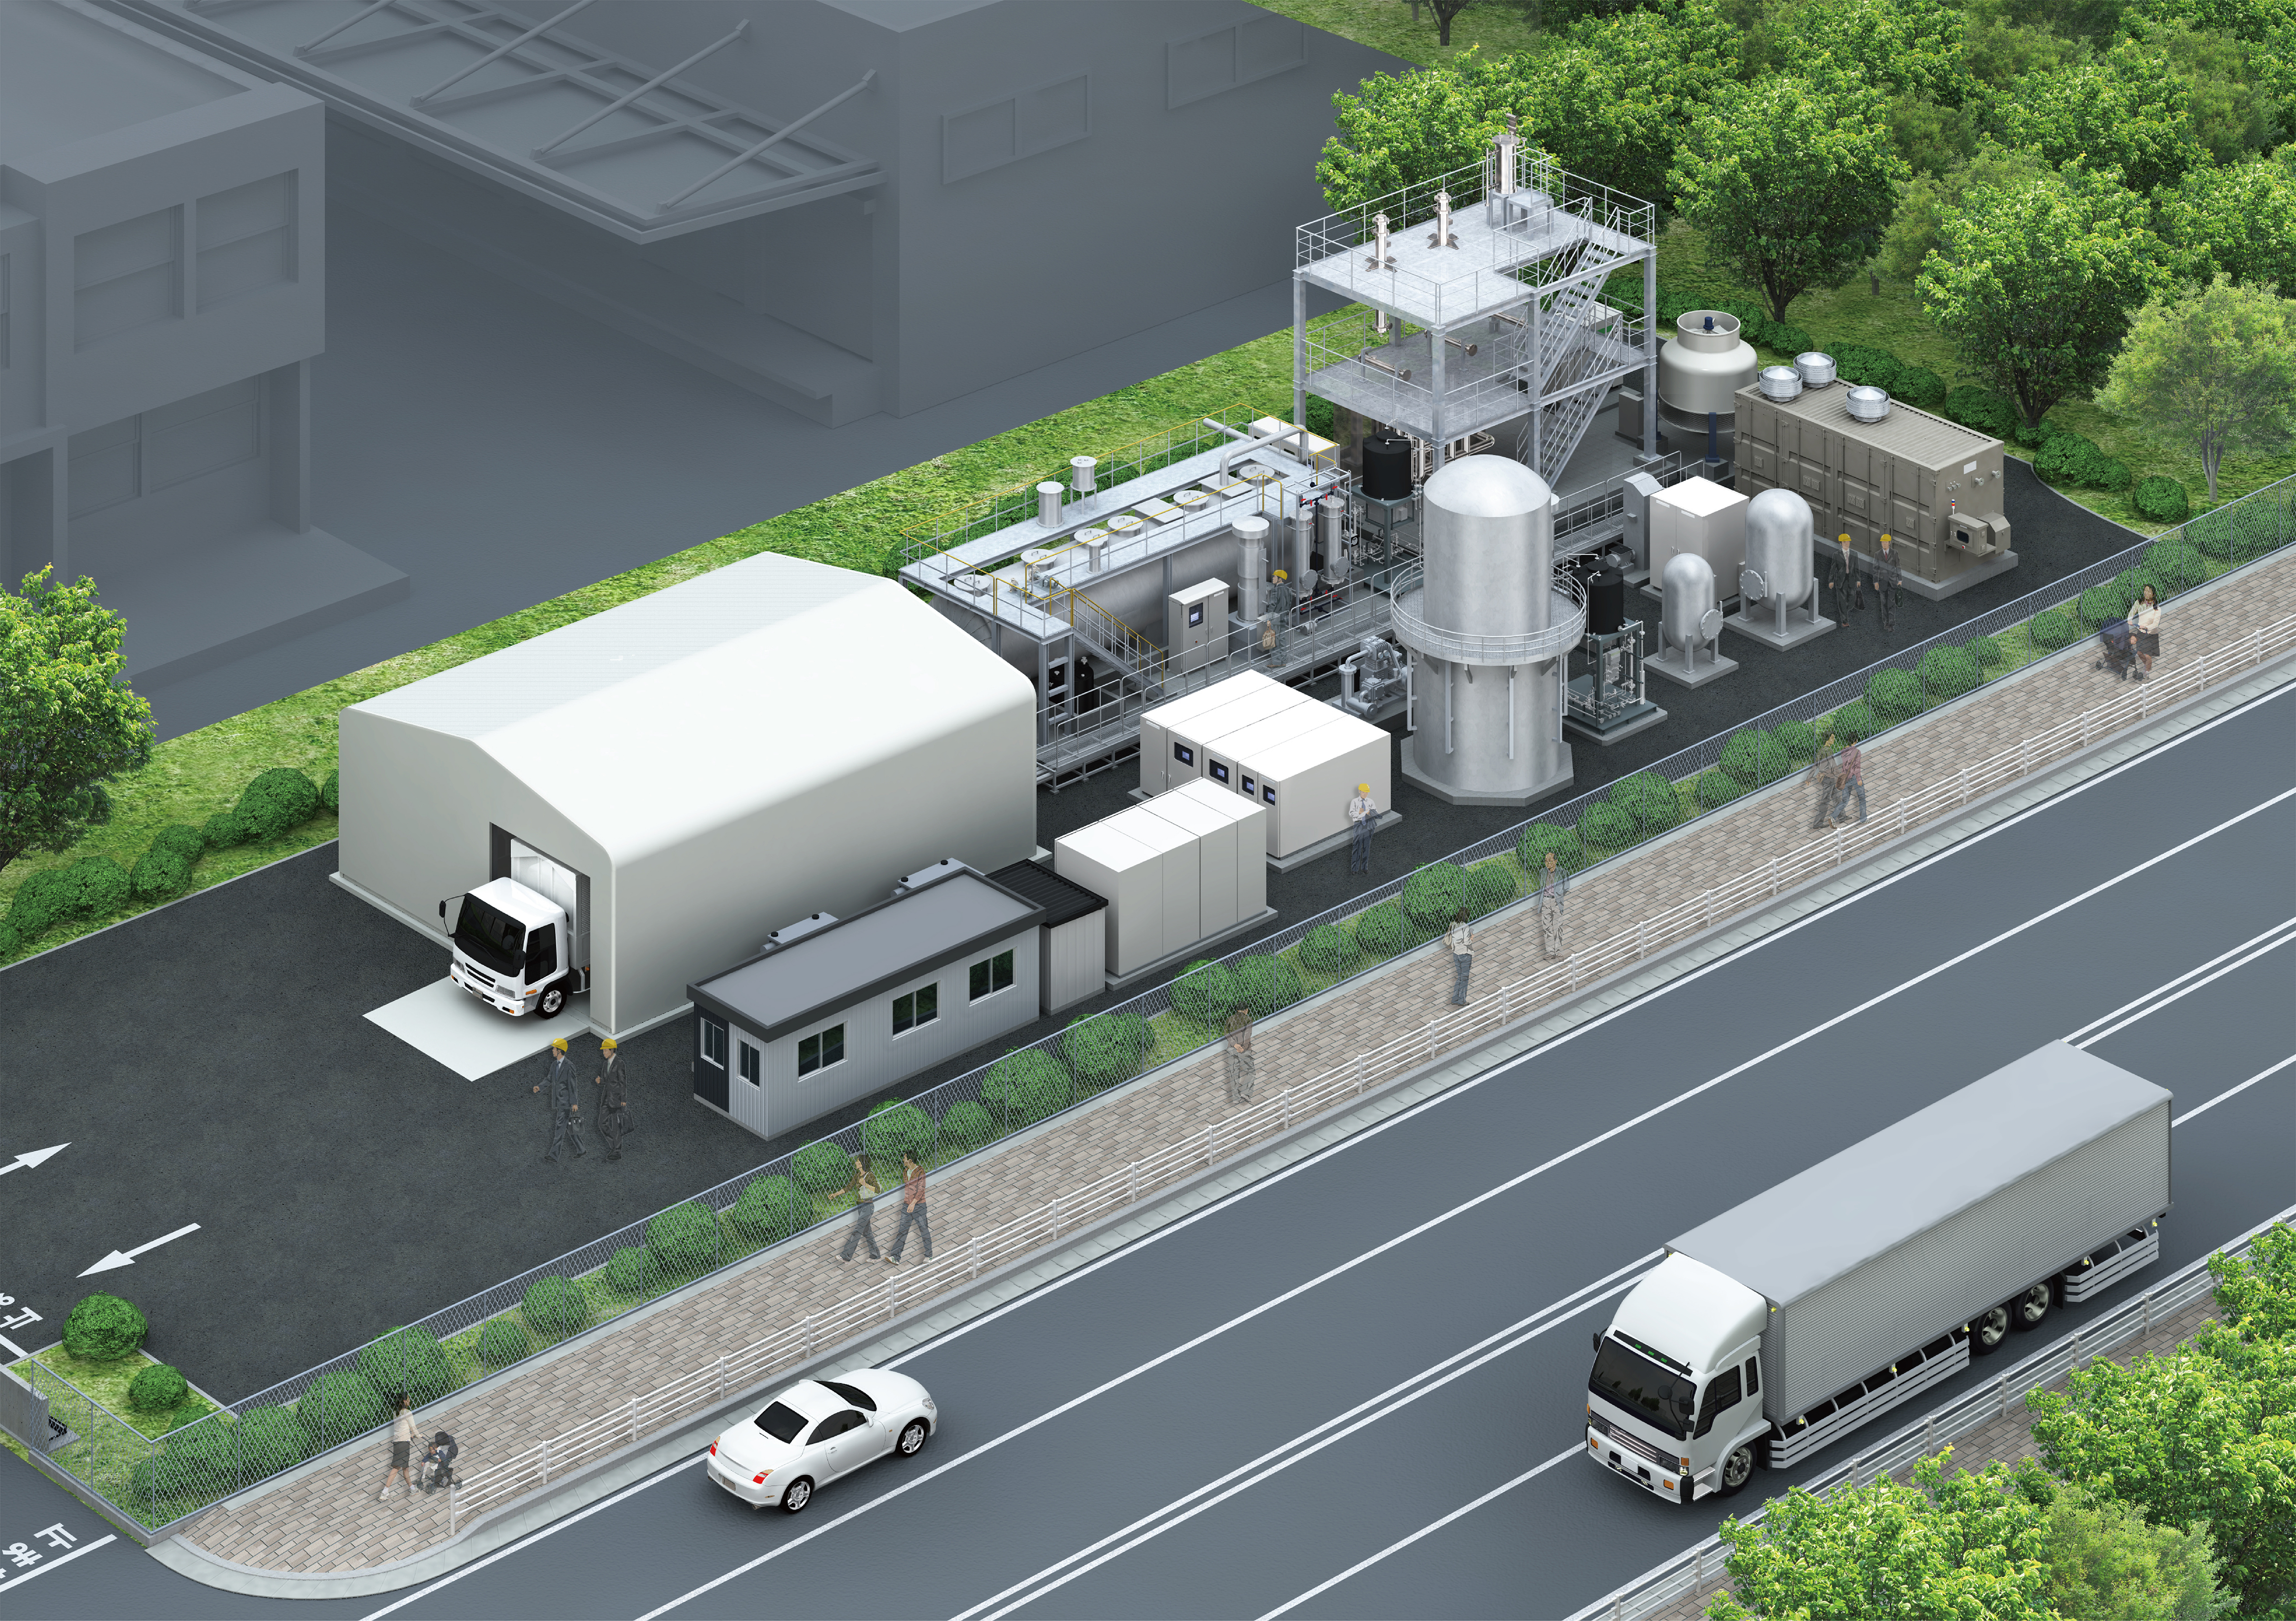 Start of a Hydrogen Supply Chain Construction/Demonstration Project by Methanation Utilizing Hydrogen Derived from Renewable Energy Sources and Biogas Derived from Kitchen Waste in Urban Areas